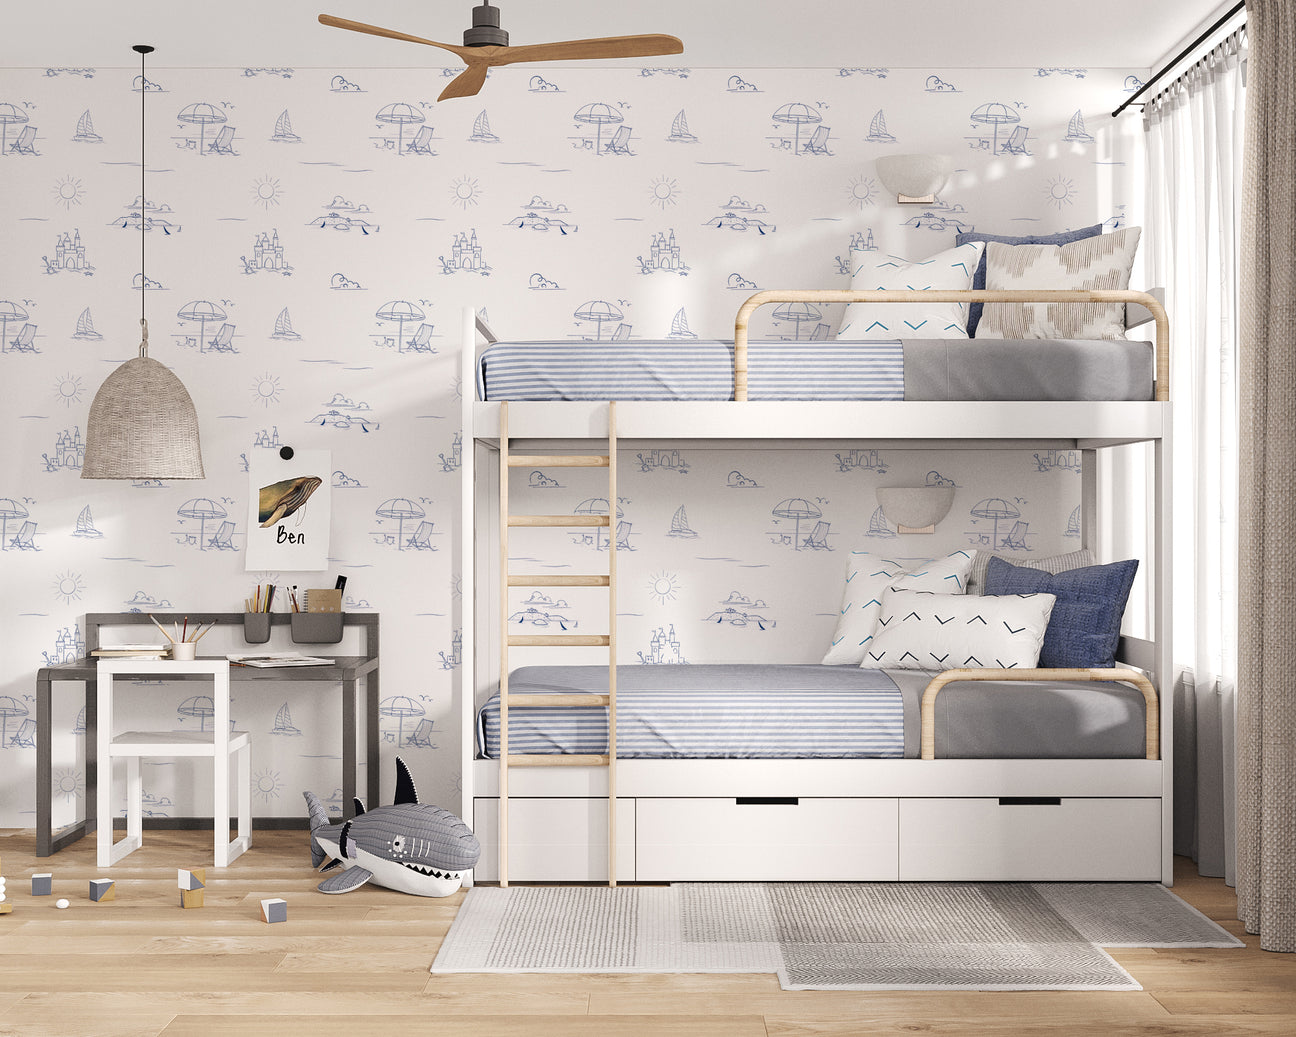 Summer Coastal Beach Day, Wallpaper in boys bedroom with white furniture